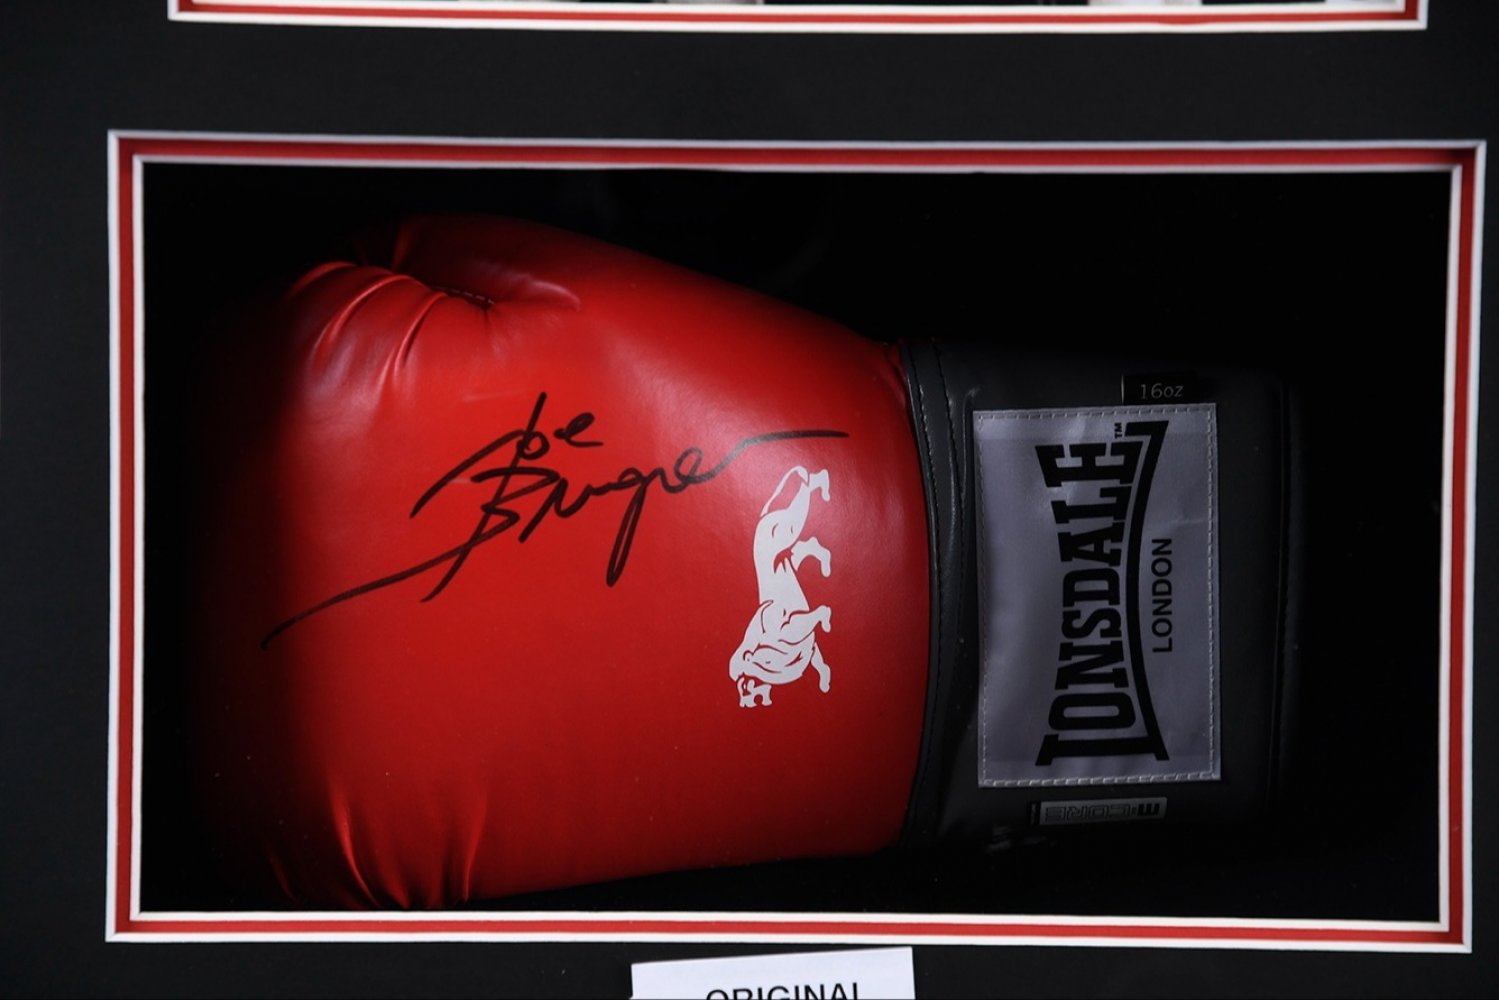 A very well framed boxing glove signed by the heavyweight boxer JOE BUGNER - Image 2 of 2